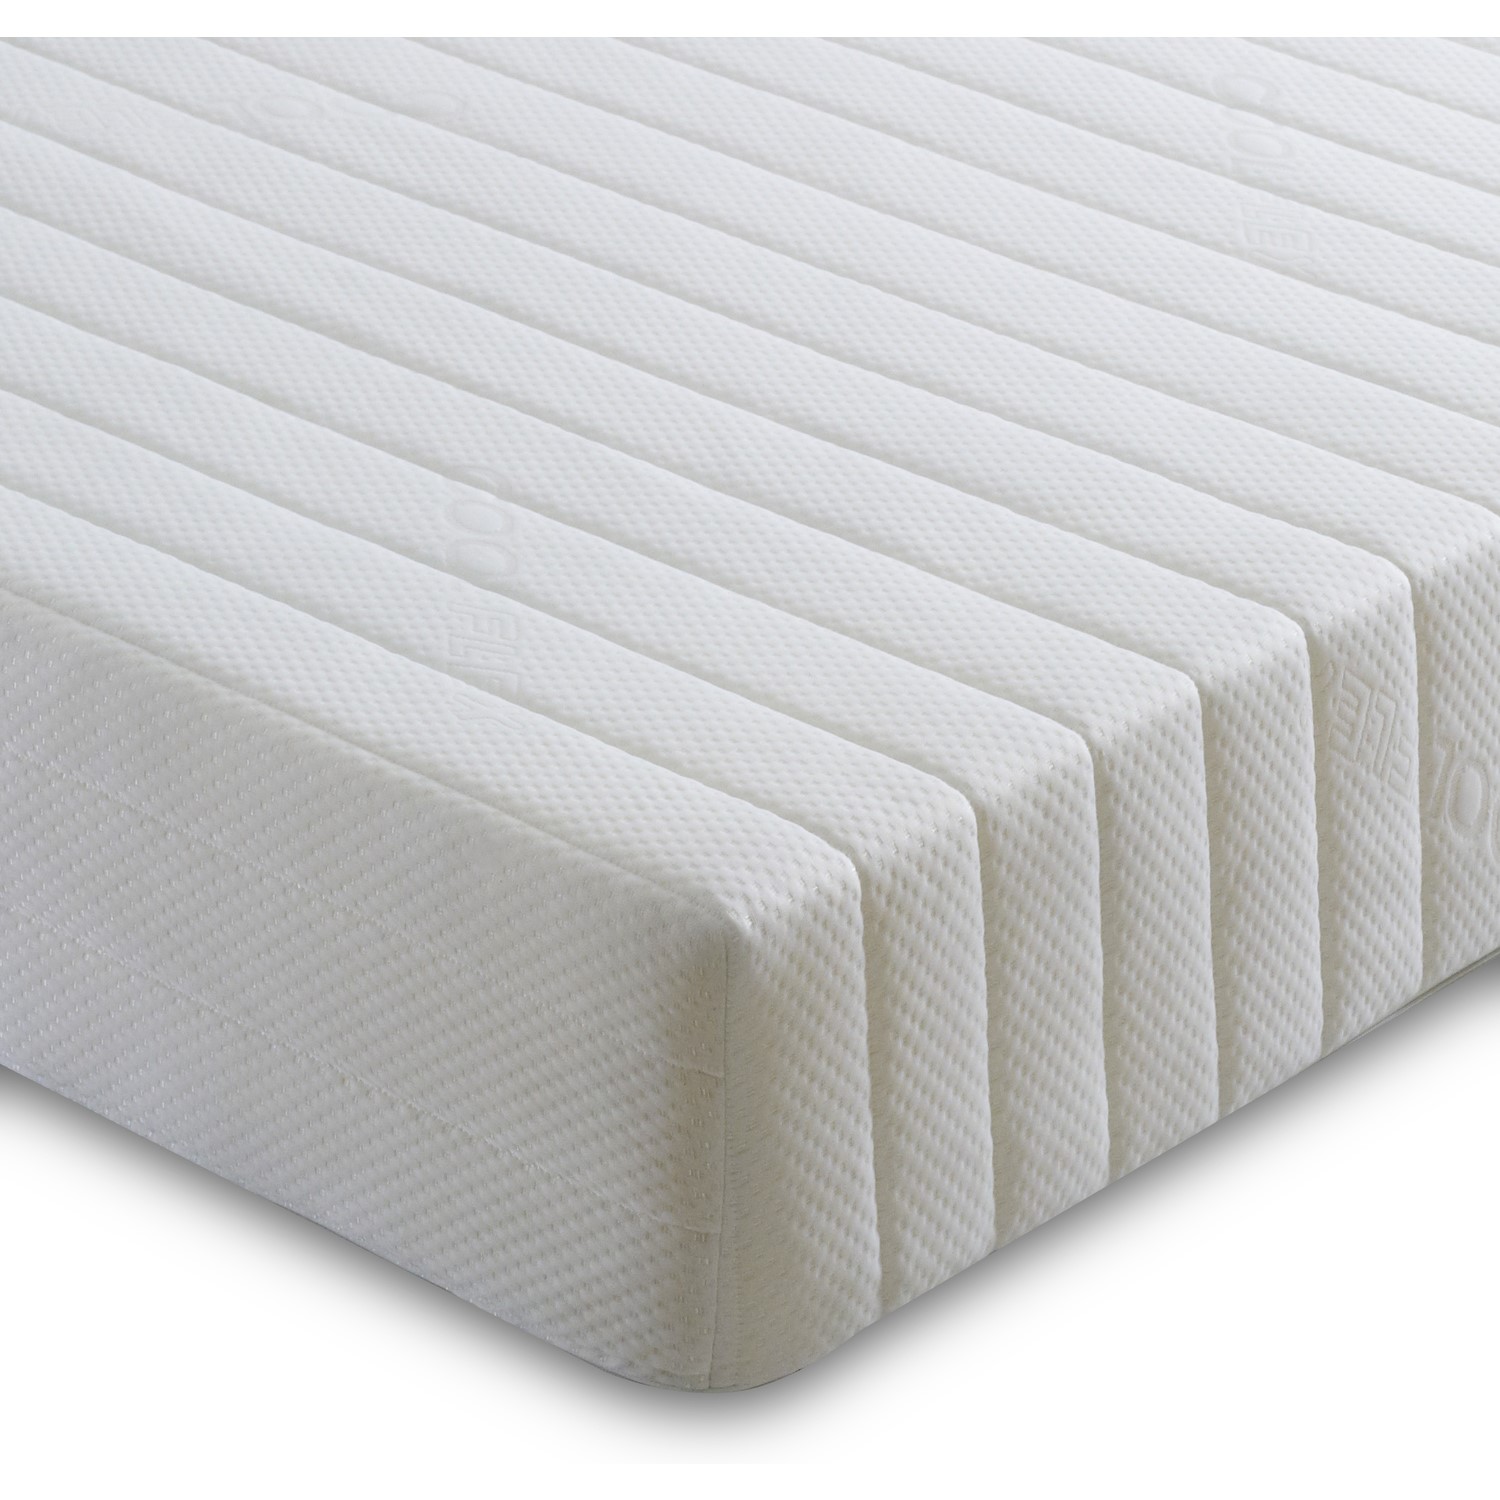 Visco therapy cooling hybrid memory foam and coil spring mattress - single